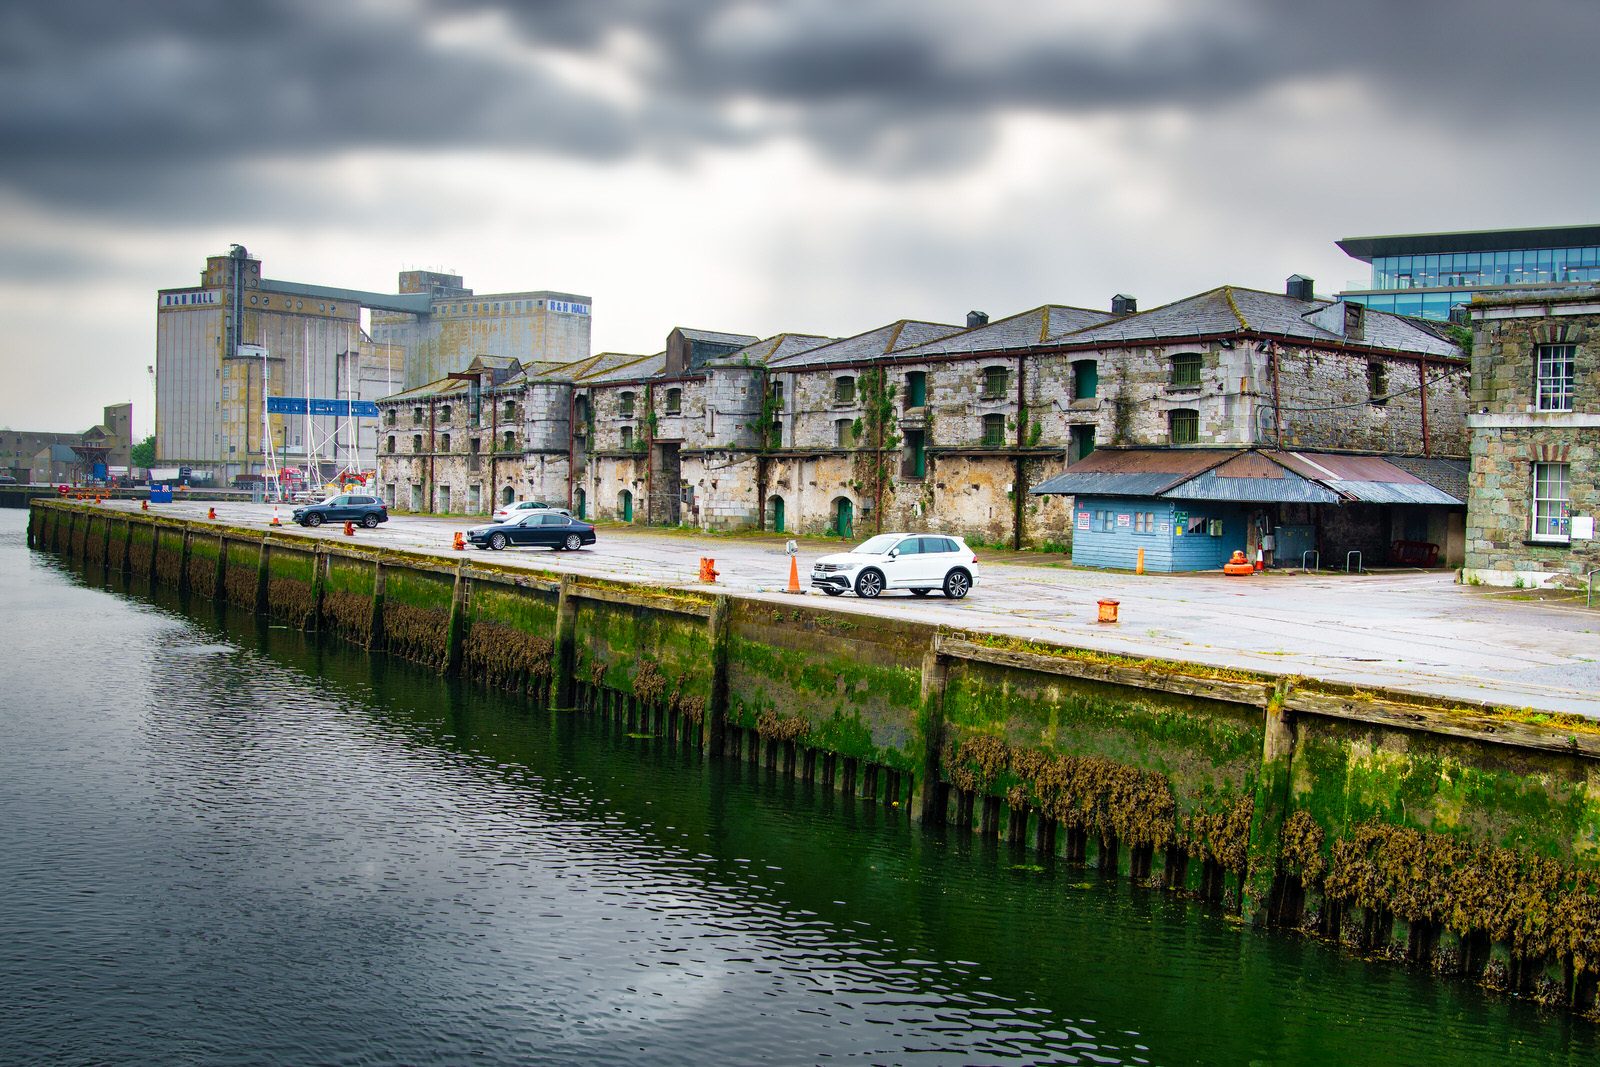 CUSTOM HOUSE HOUSE QUAY [I PHOTOGRAPHED THE AREA AND NEARBY IN JULY 2022] 023